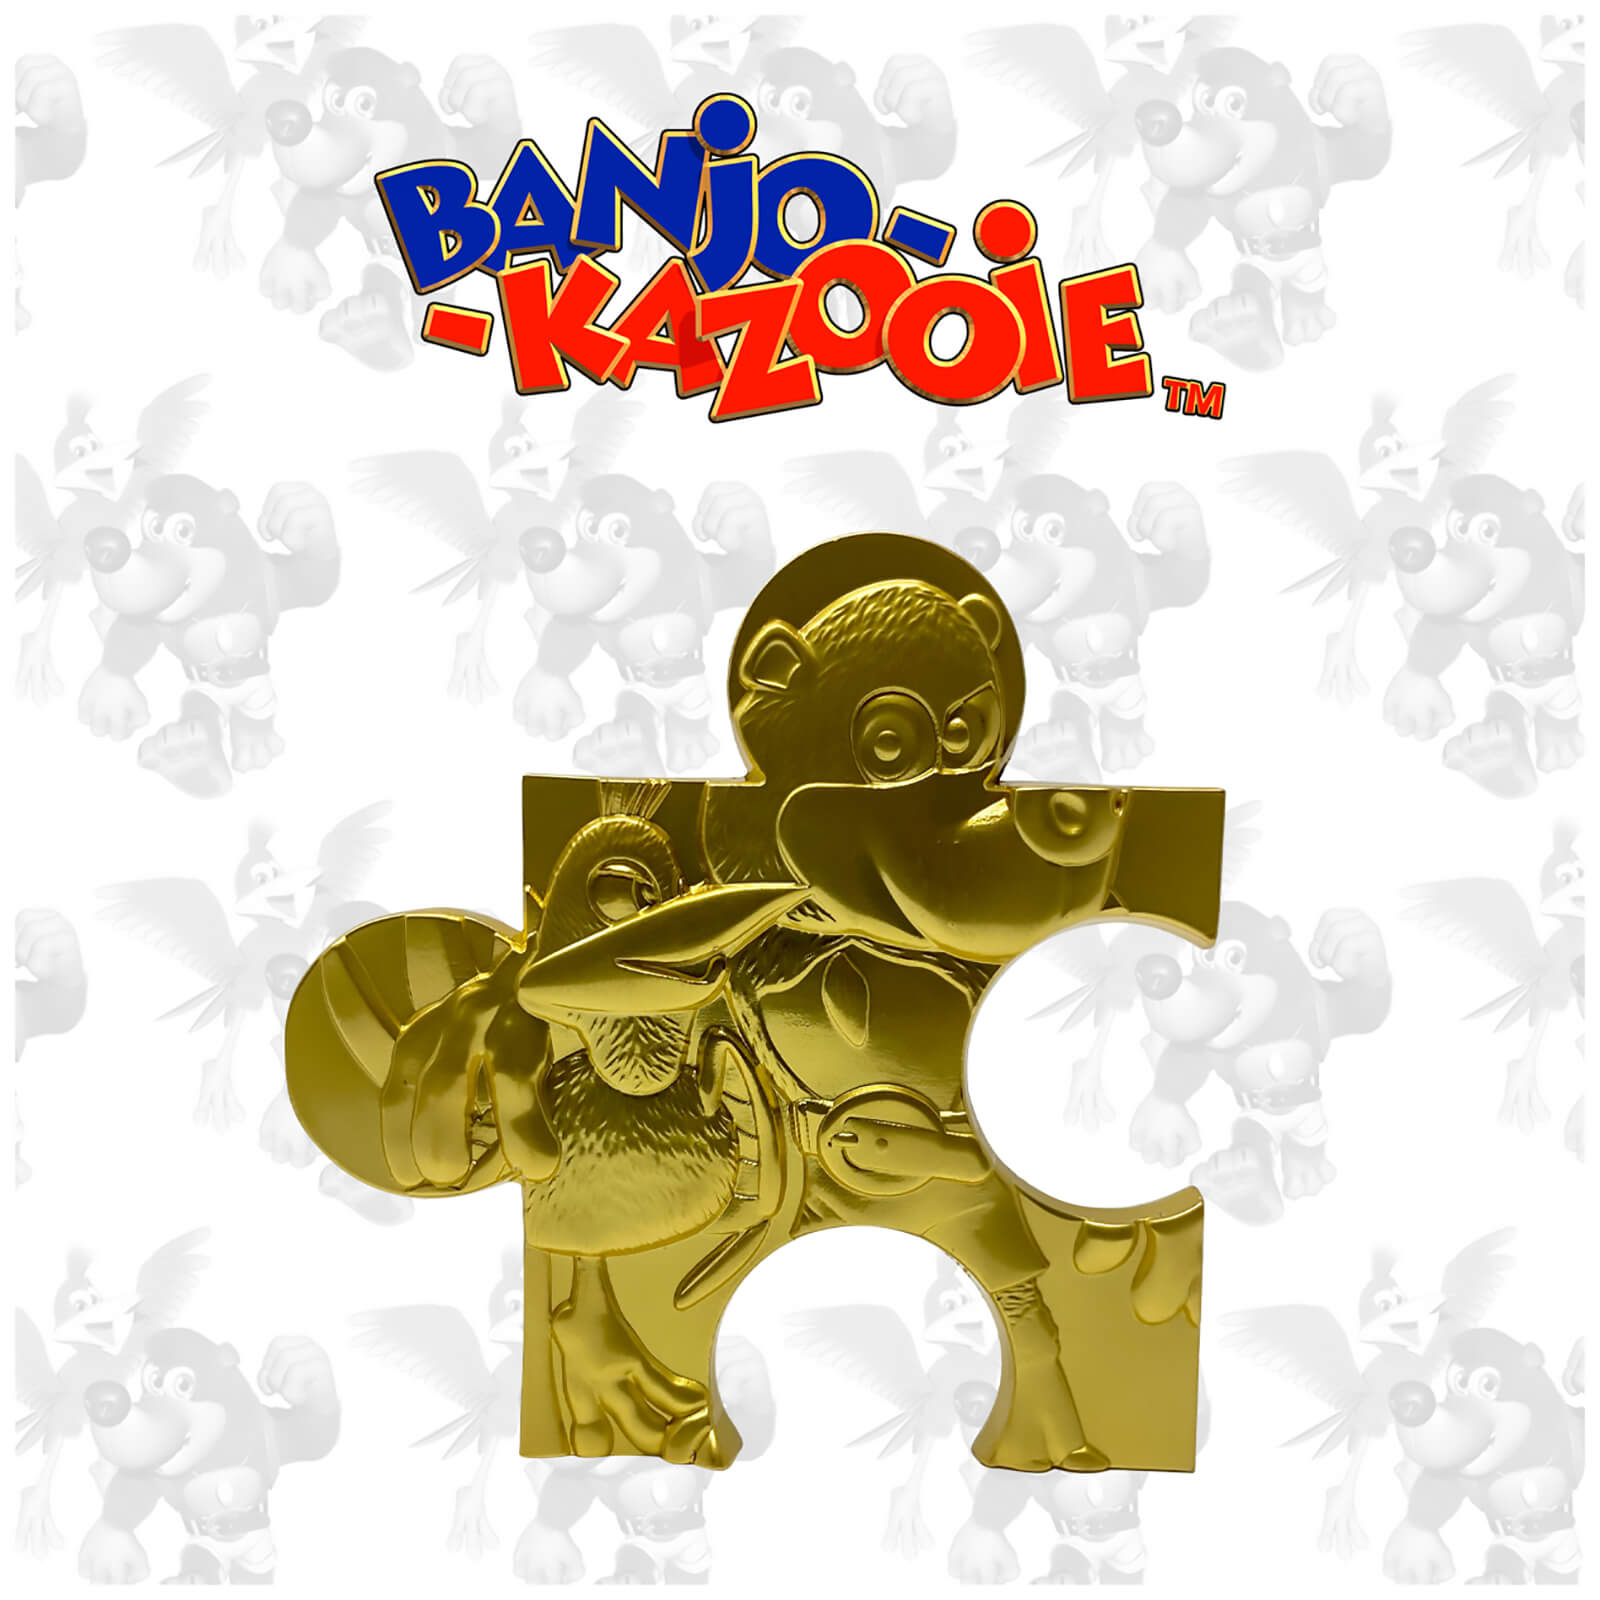 Photos - Other Toys Banjo Kazooie Limited Edition 24K Gold plated Jigsaw Piece - Jiggy (Rare S